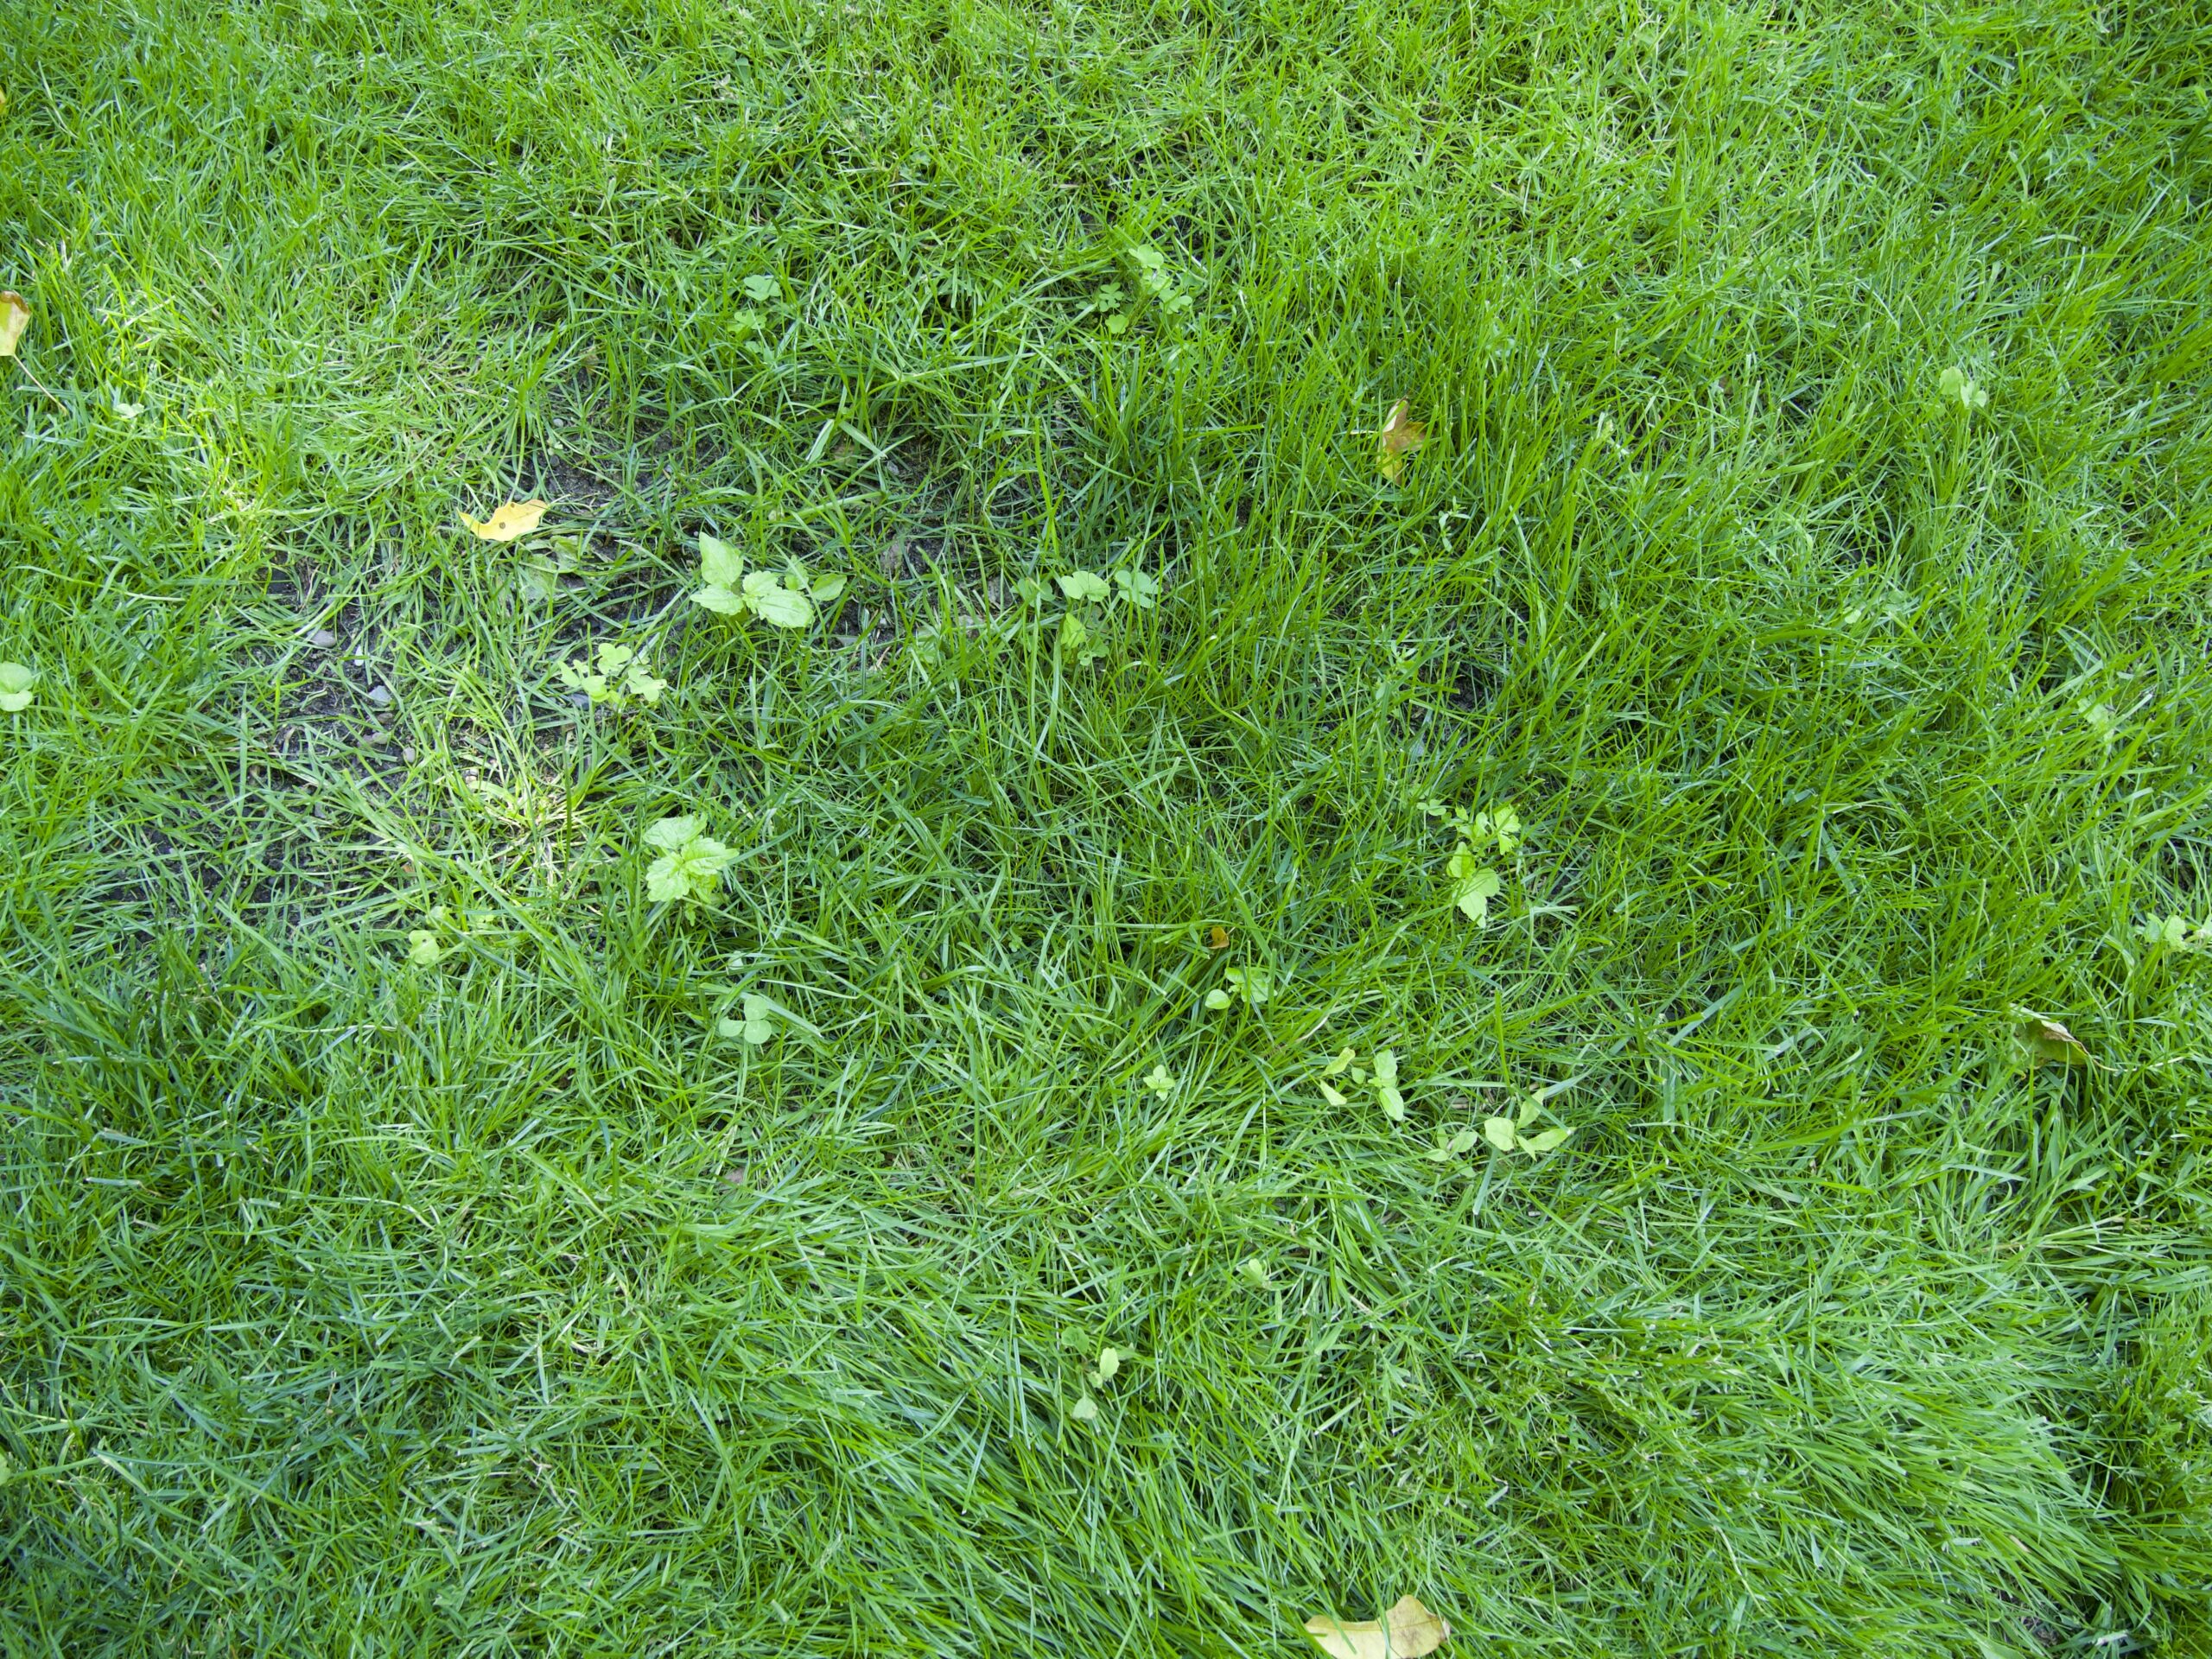 About six weeks after the initial spring seeding of this filled-in lawn depression.  The weeds emerging would not have germinated if a fall seeding was done.  ANDREW MESSINGER